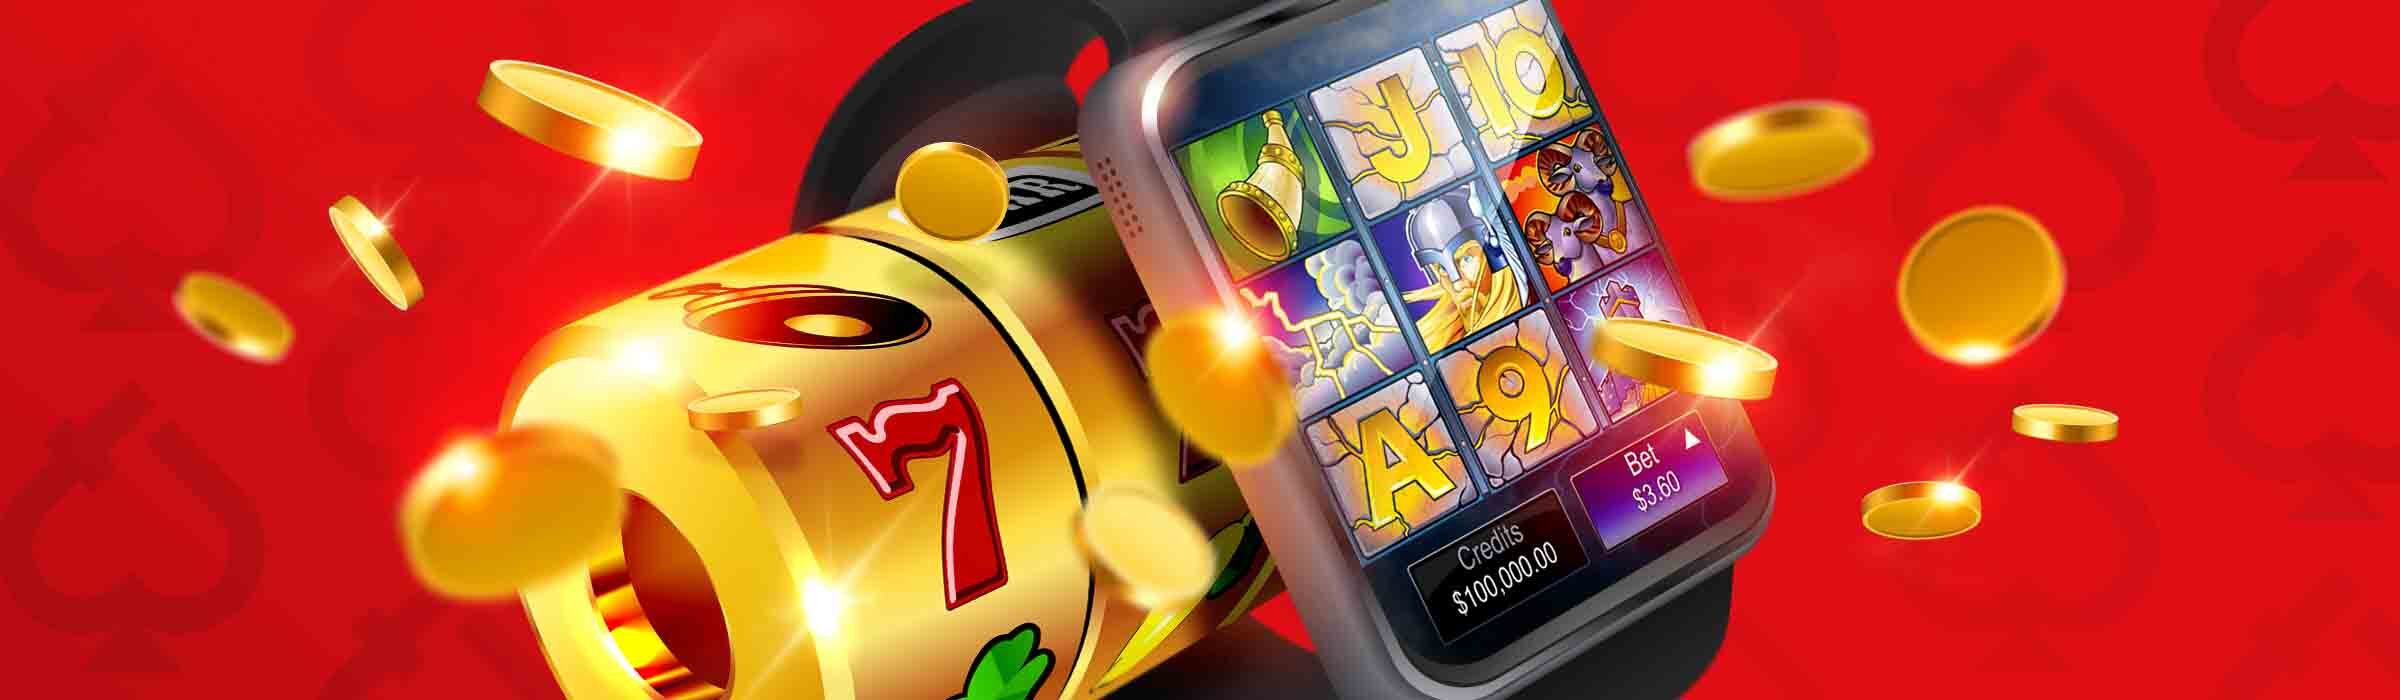 smartwatch-gambling-latest-trend-in-online-casinos Listen To Your Customers. They Will Tell You All About Casino